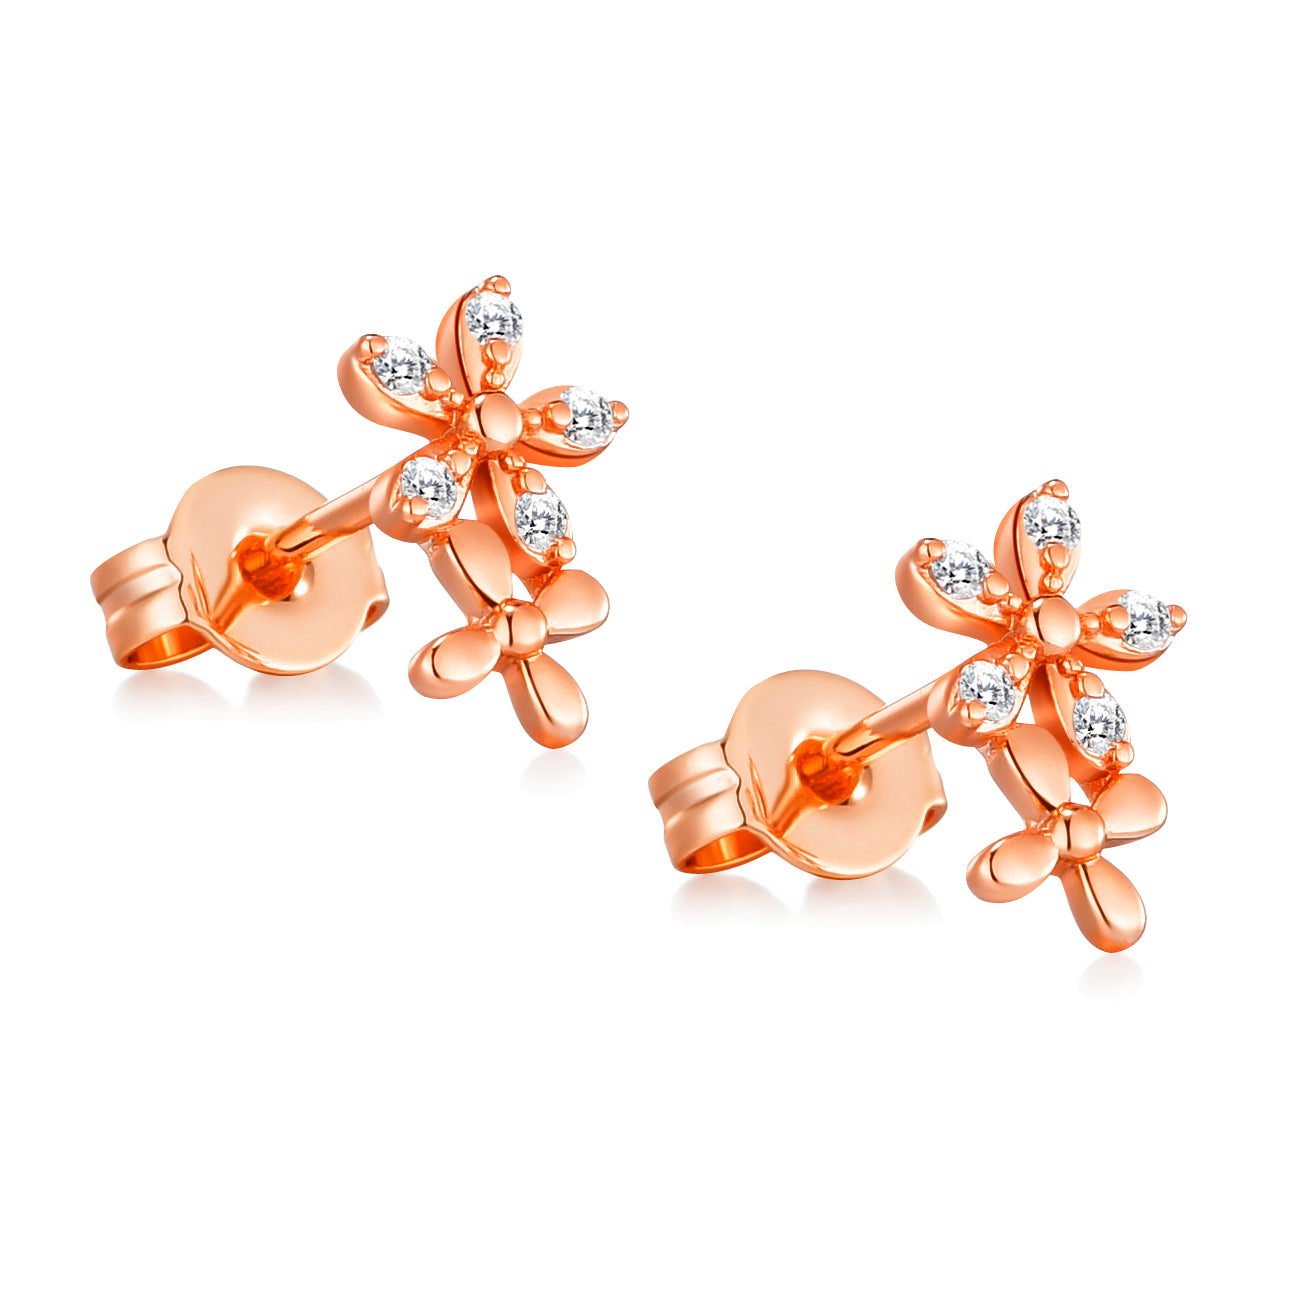 Rose Gold Plated Flower Earrings Created with Zircondia® Crystals by Philip Jones Jewellery